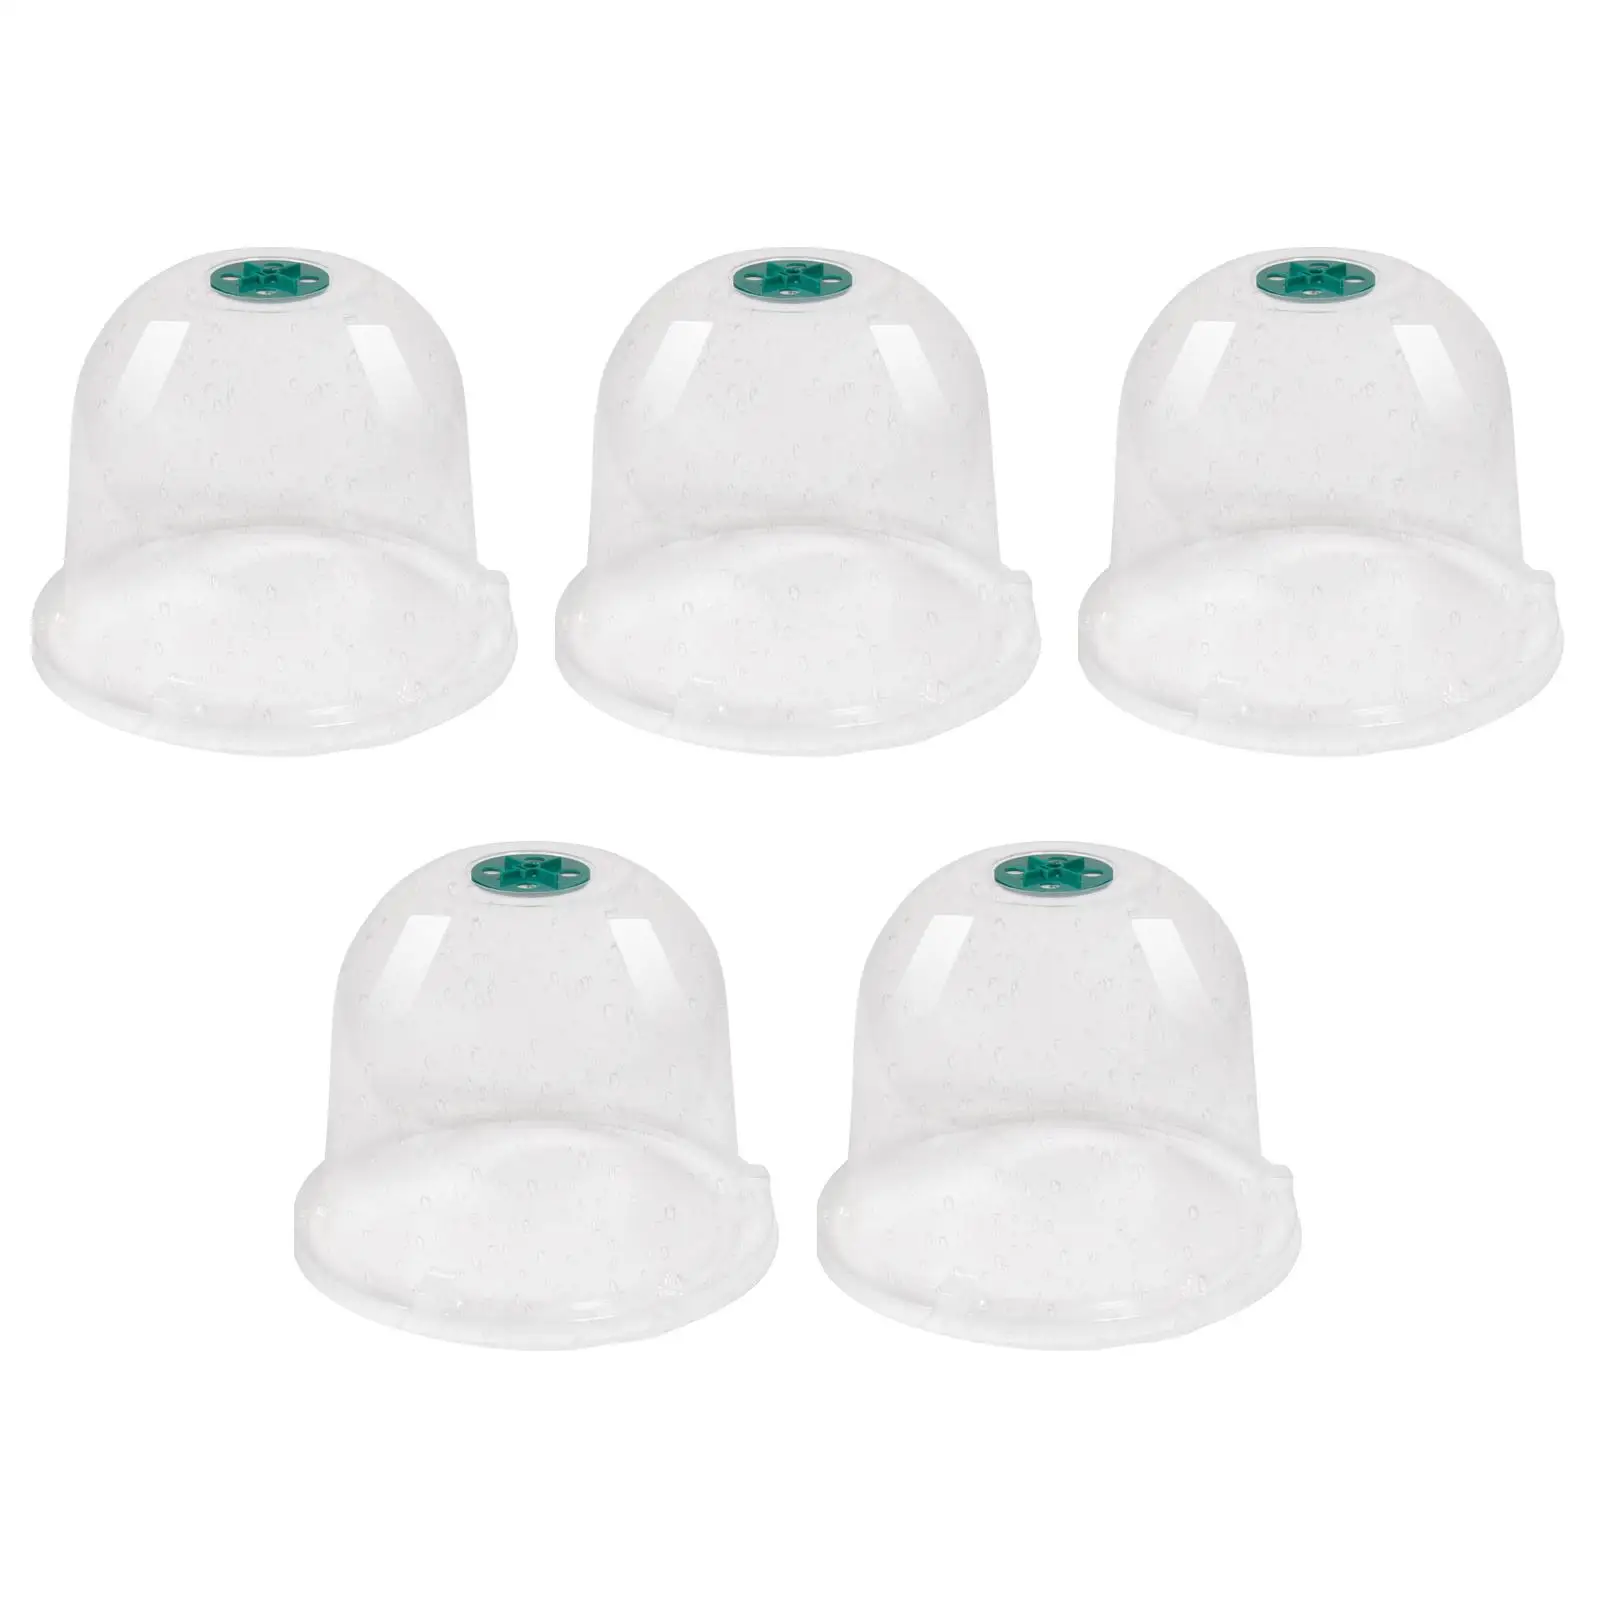 5x Warm Covers with Lights Breathable Multipurpose Rotatable Switch Seedling